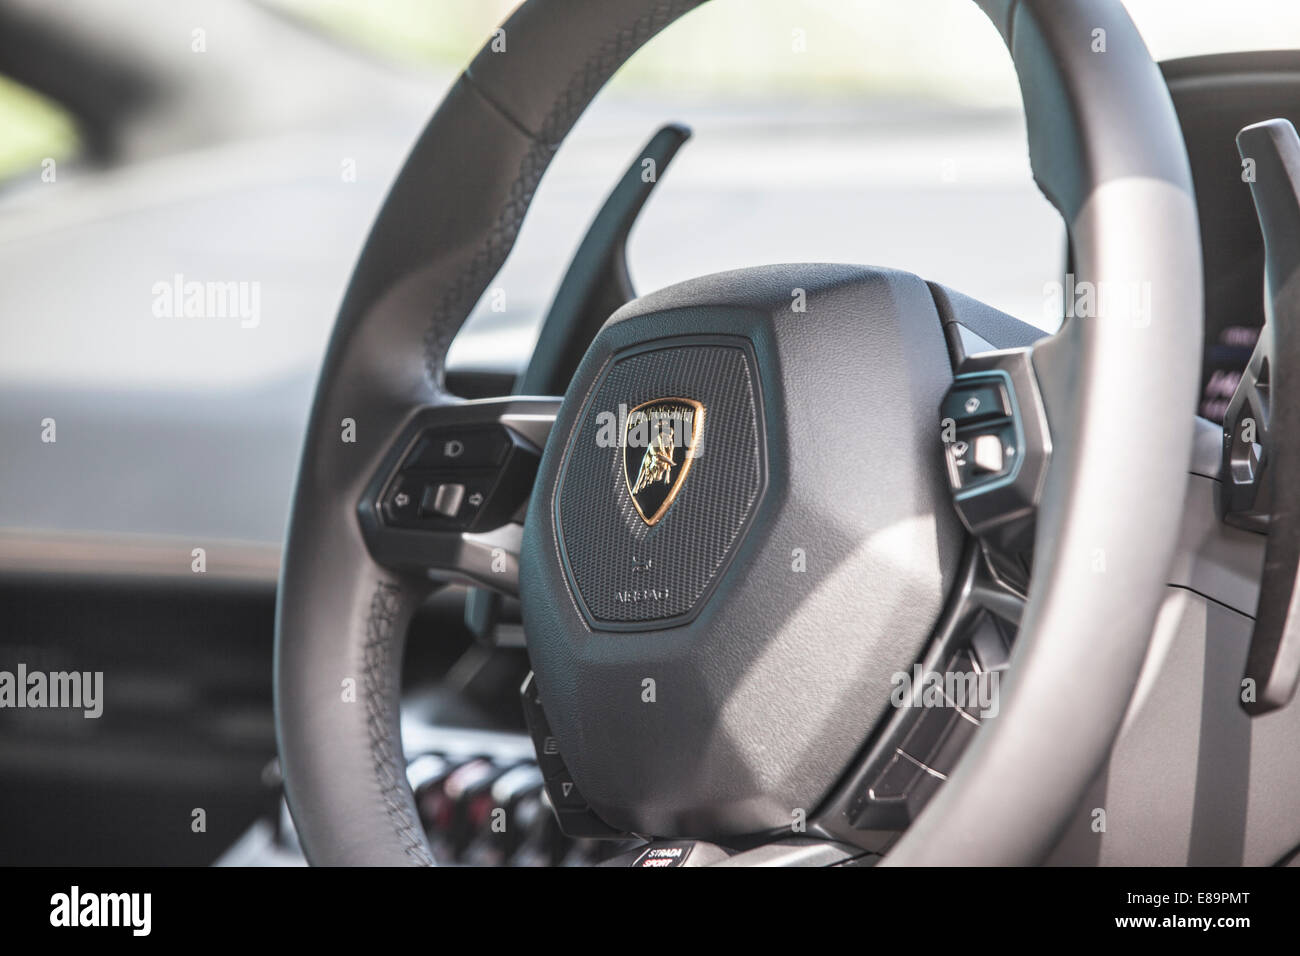 Aberdeen, Hong Kong, 18th Sep, 2014. View of the steering wheel of the new Lamborghini Huracan sports car, parked near a shipyard. Photoshoot for Asia Pacific Boating Magazine. Stock Photo